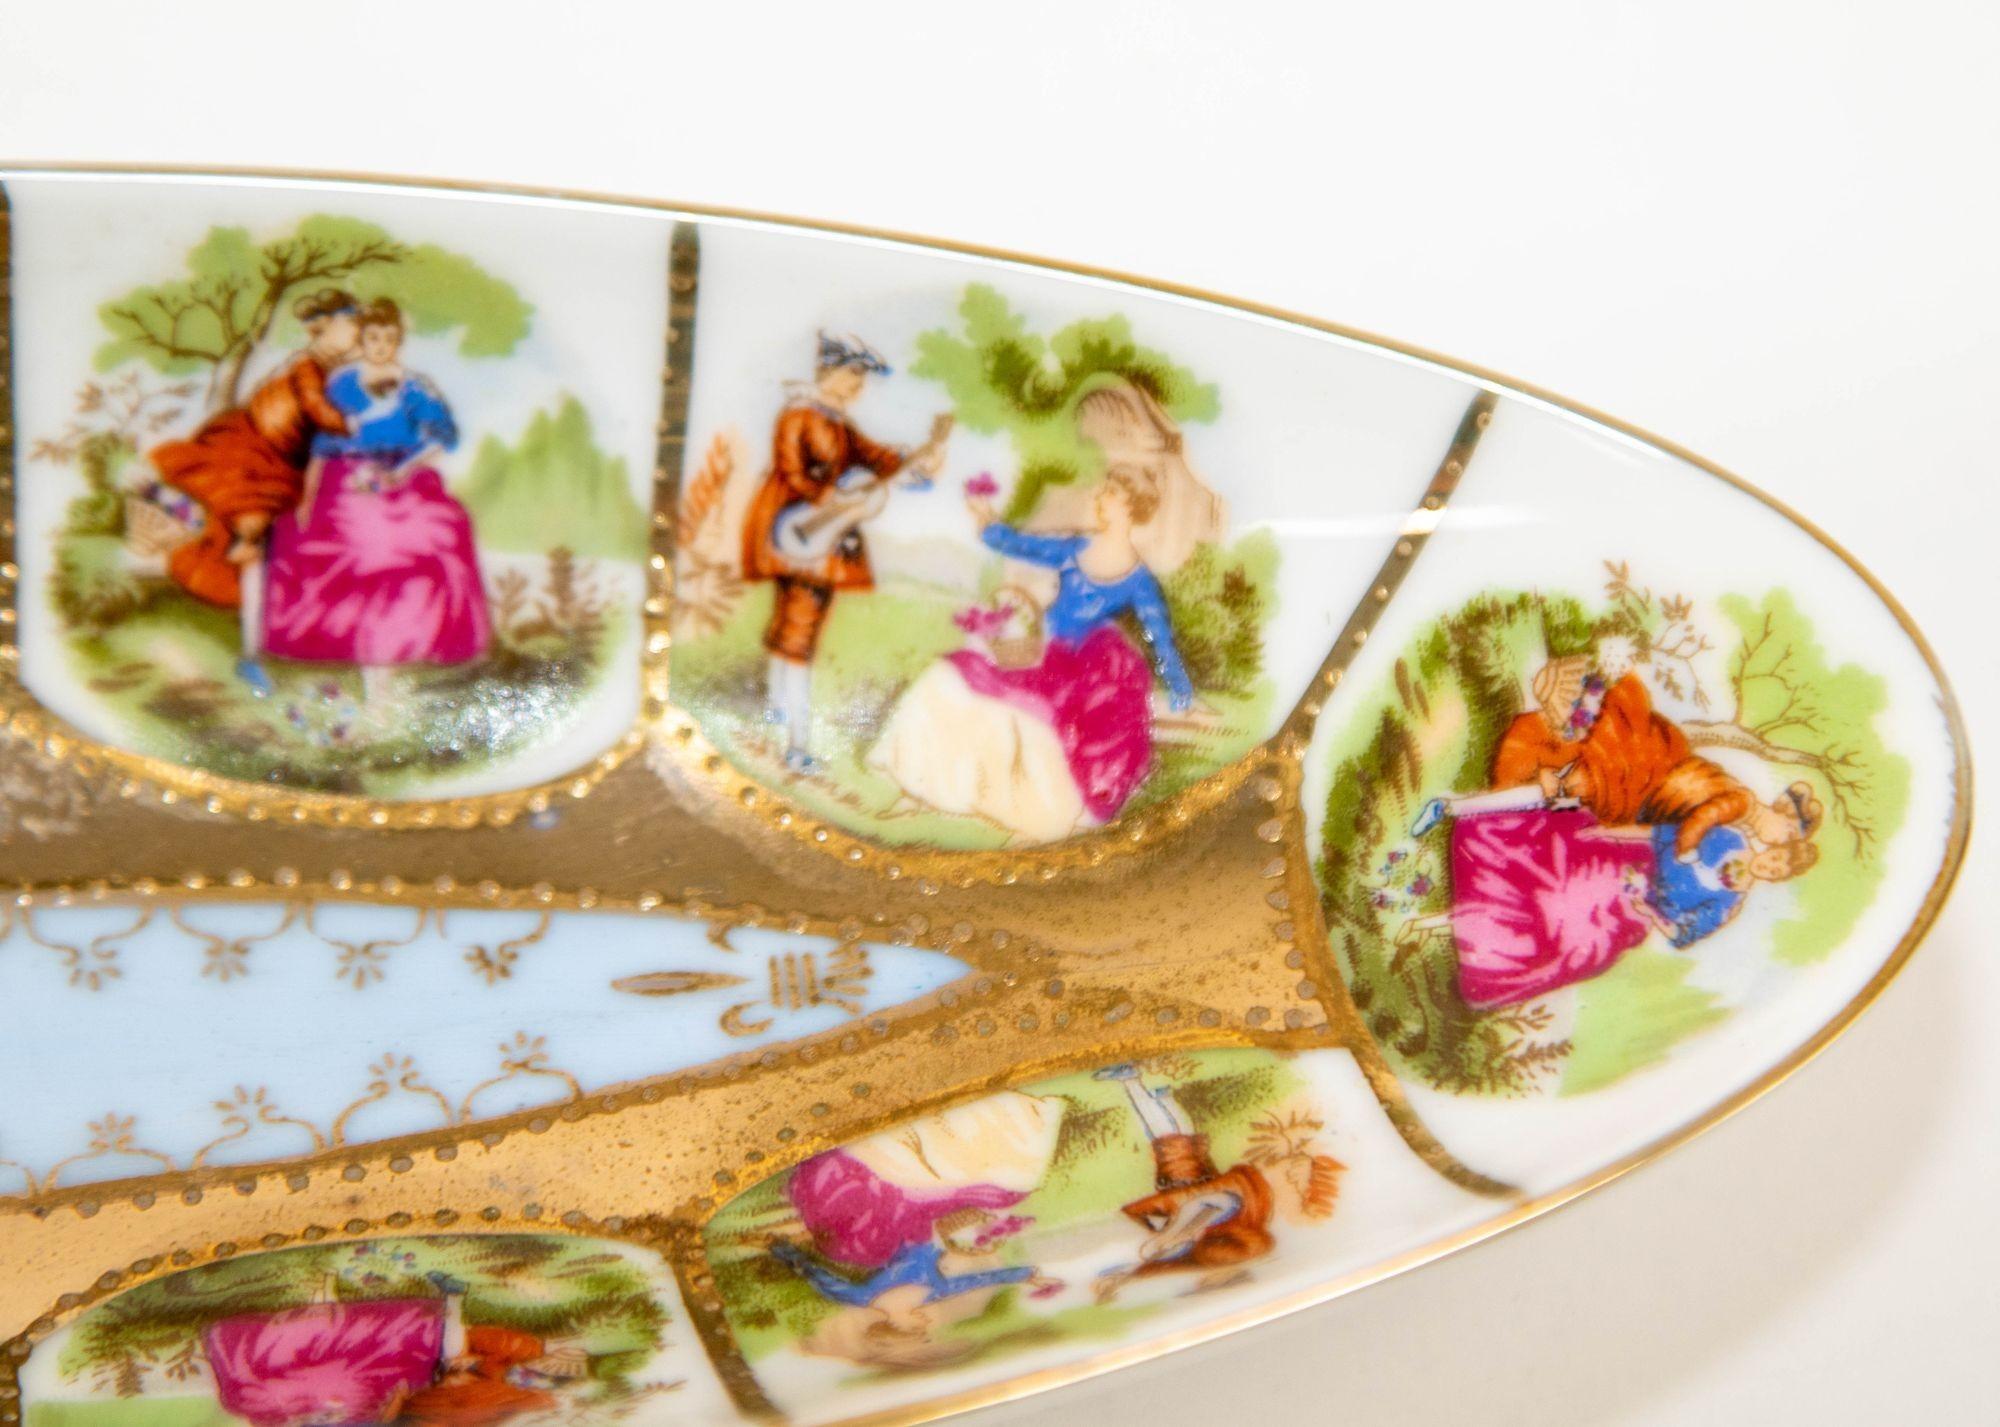 Royal Vienna Austria Hand Painted Porcelain Oval Dish circa 1940 In Good Condition For Sale In North Hollywood, CA